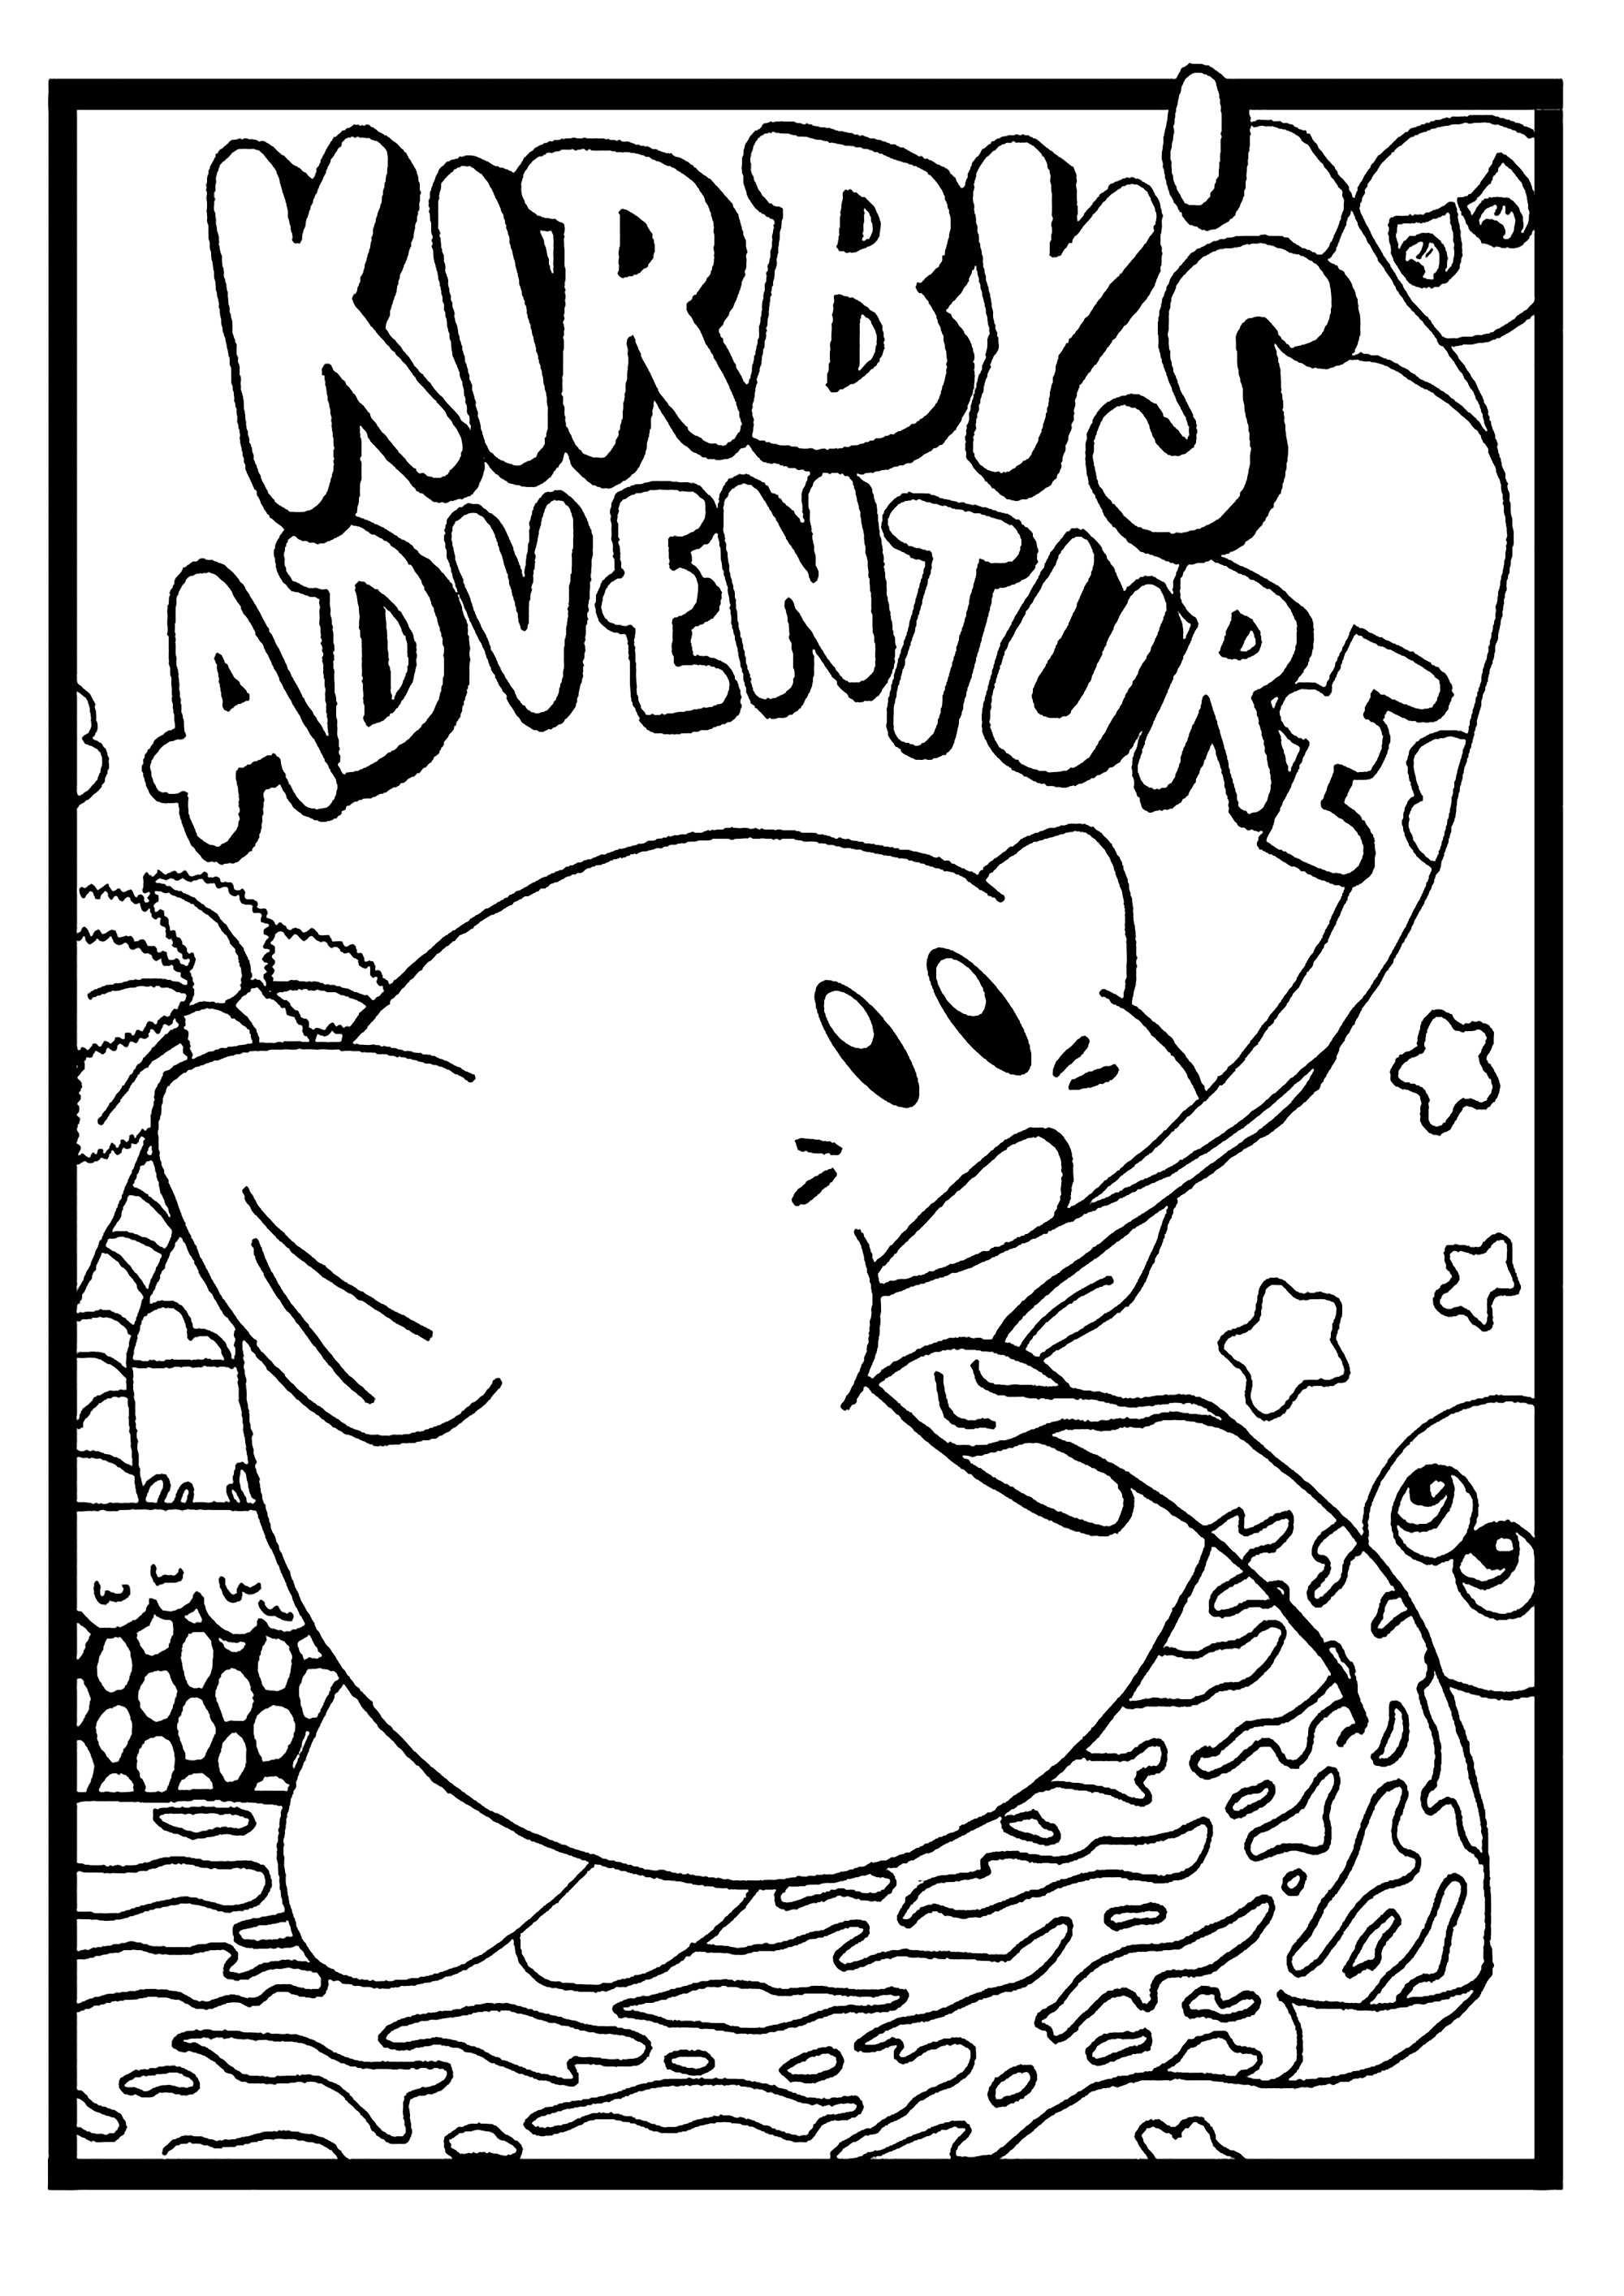 Free Kirby coloring page to print and color